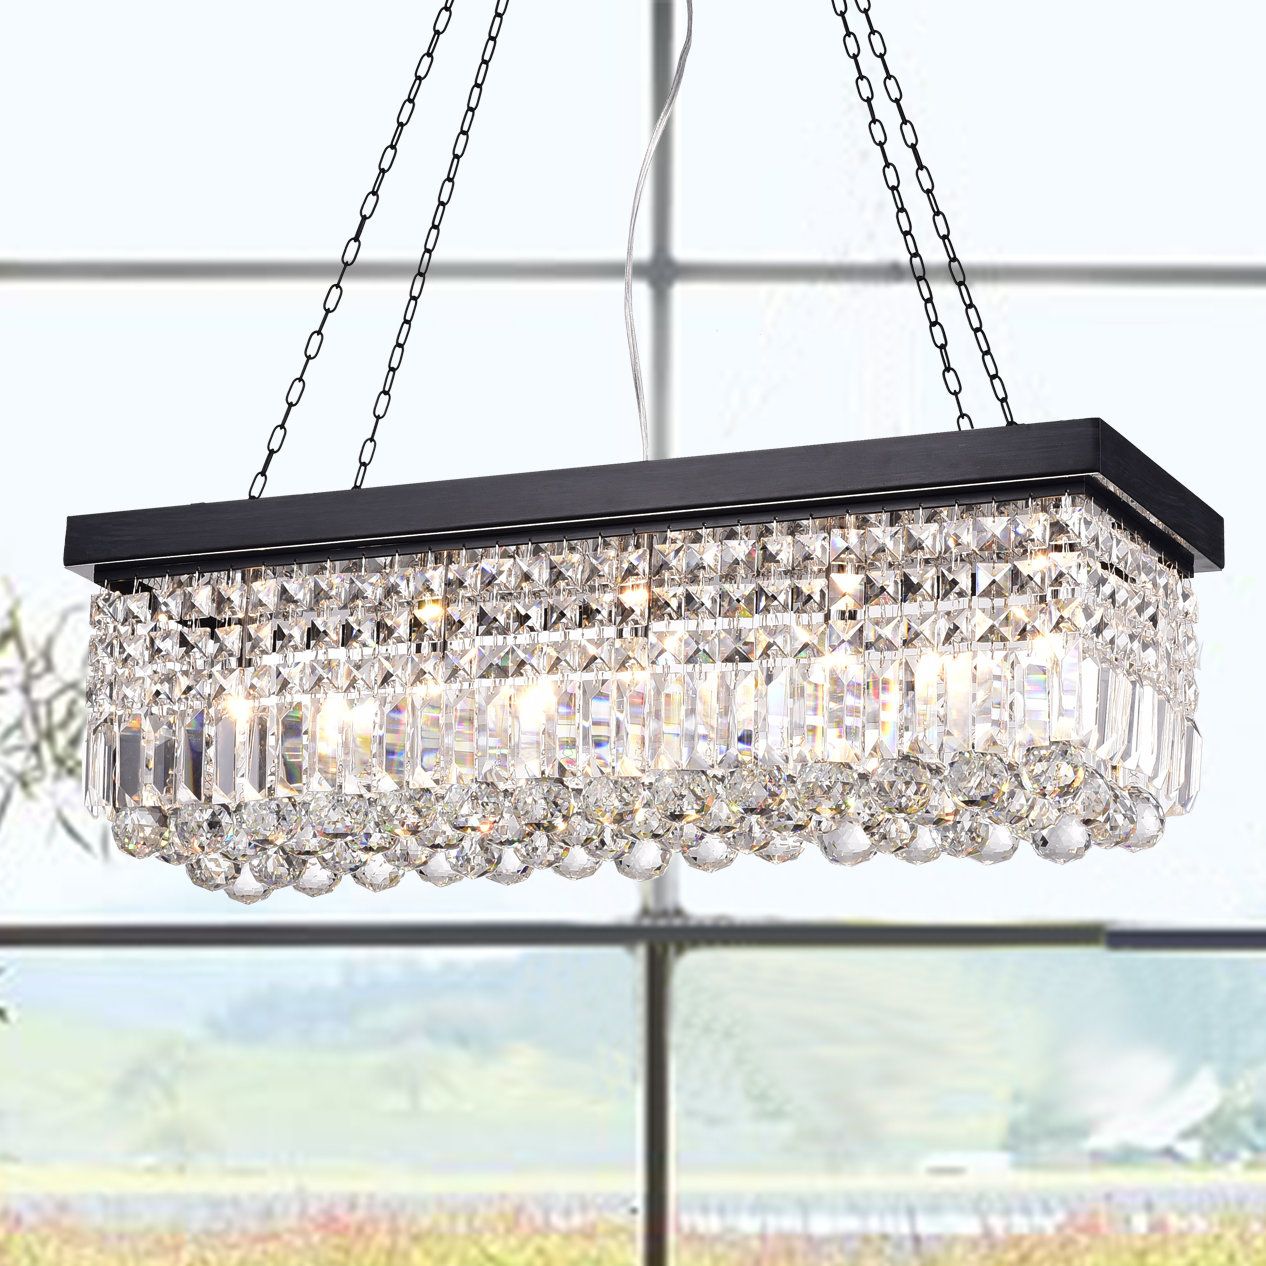 Verdell 5 Light Crystal Chandelier Pertaining To Verdell 5 Light Crystal Chandeliers (View 1 of 30)